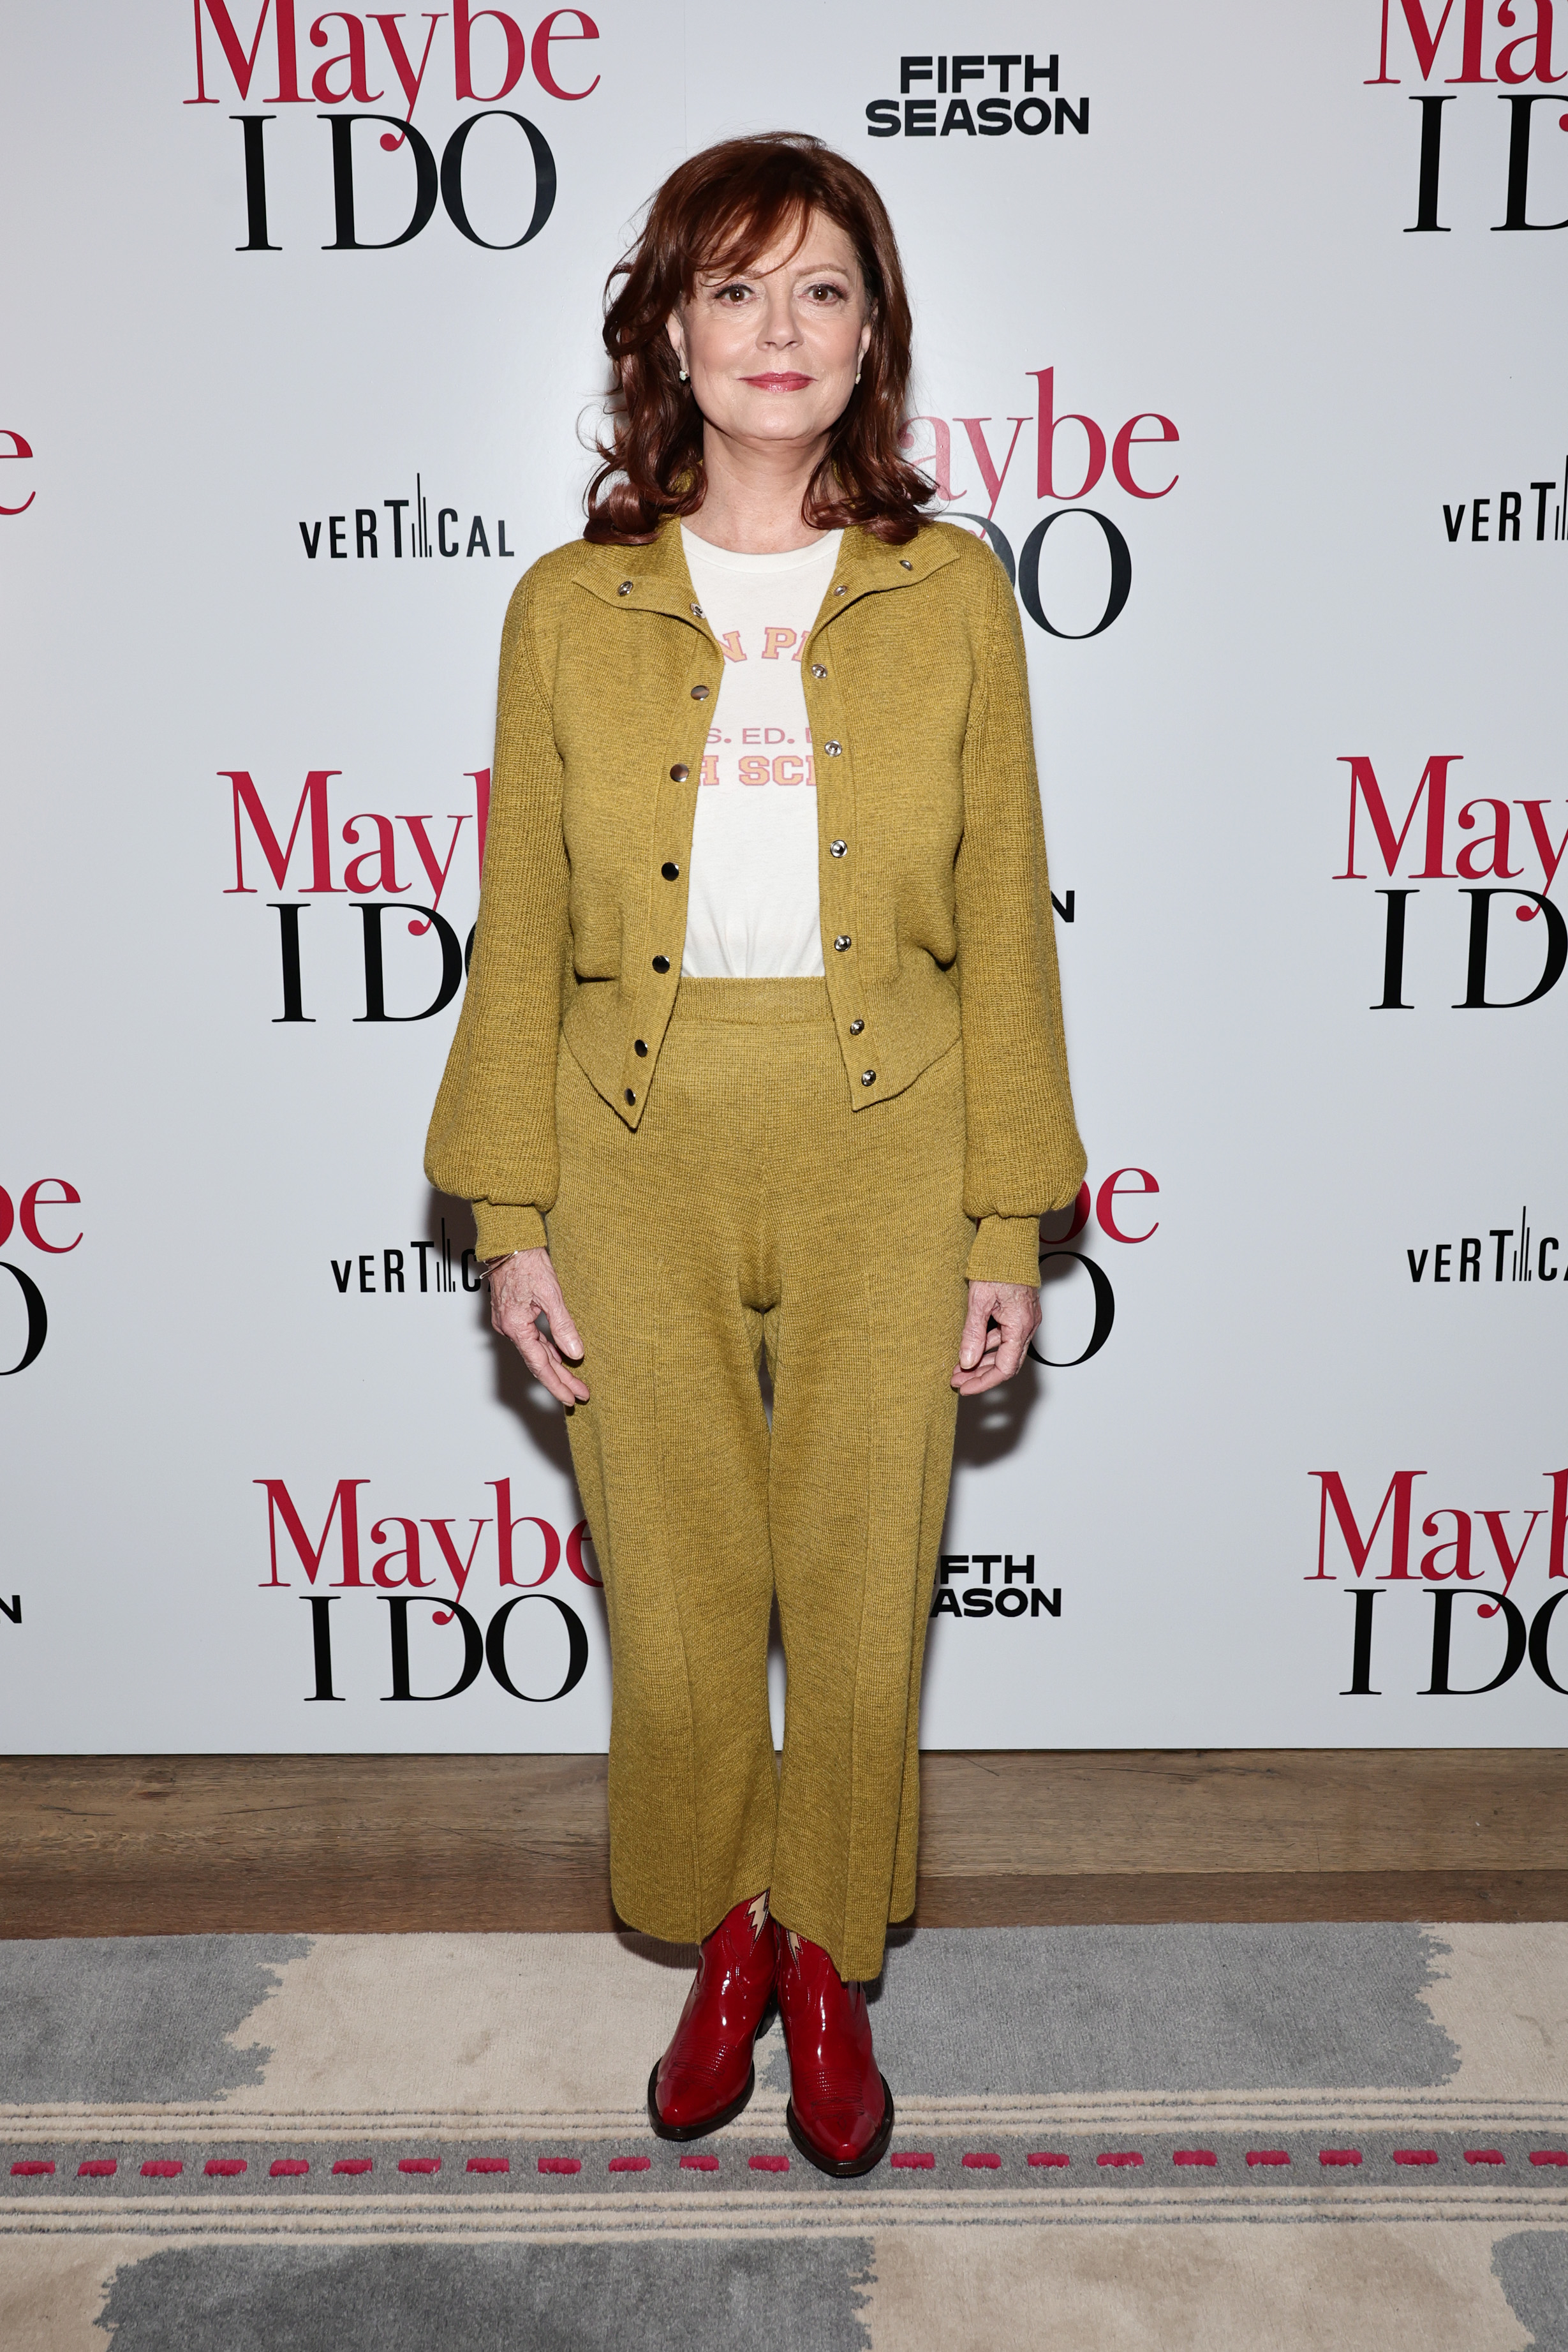 Susan in a pantsuit at a media event